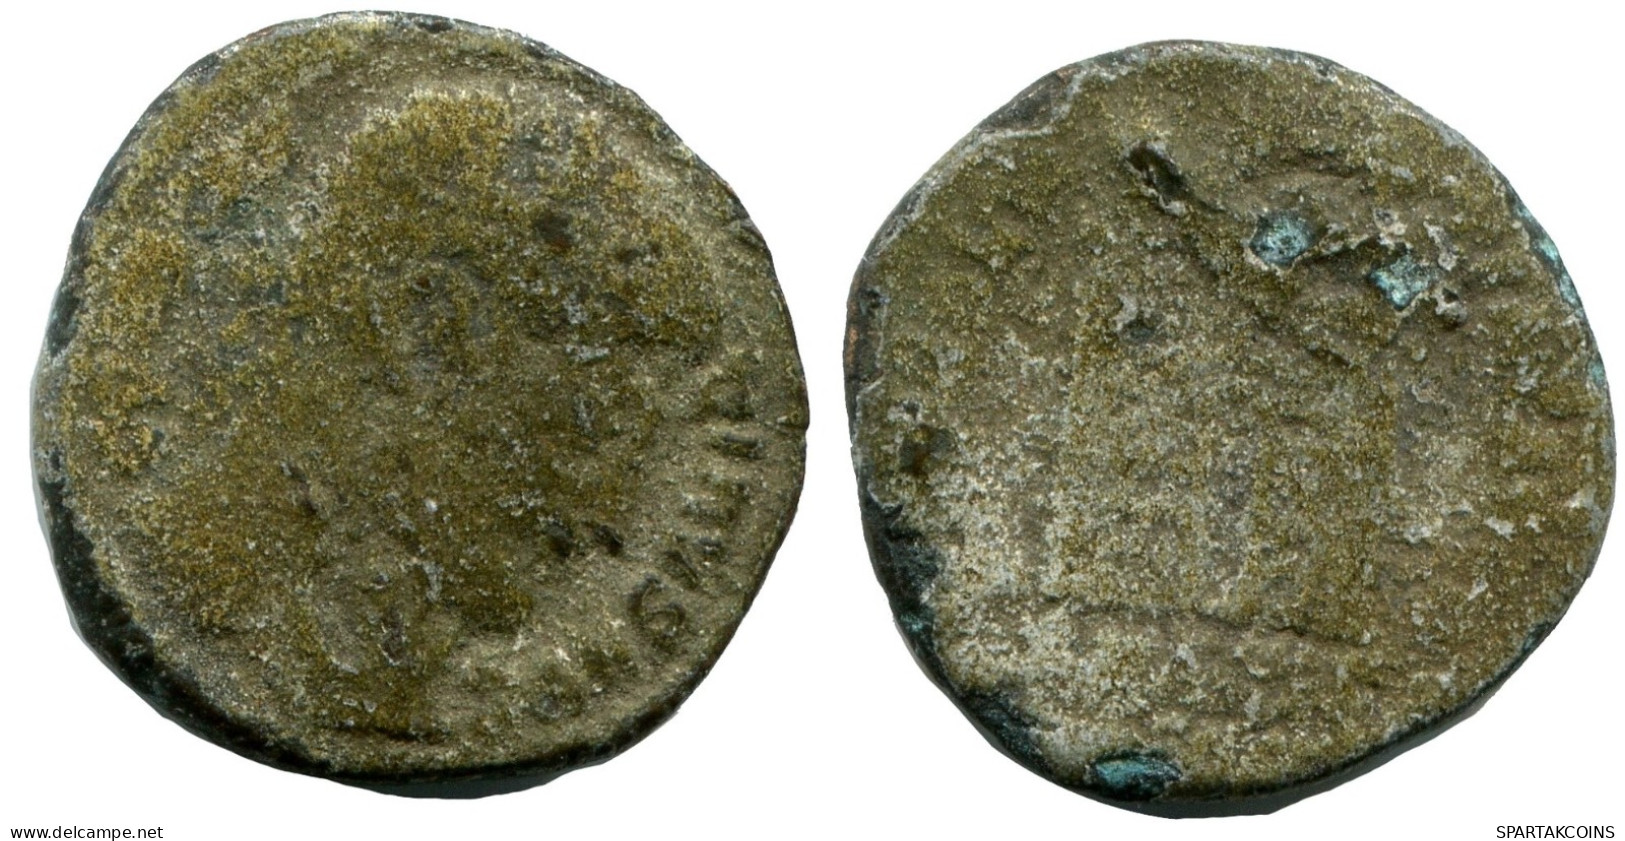 CONSTANTINE I MINTED IN ANTIOCH FROM THE ROYAL ONTARIO MUSEUM #ANC10676.14.U.A - The Christian Empire (307 AD Tot 363 AD)